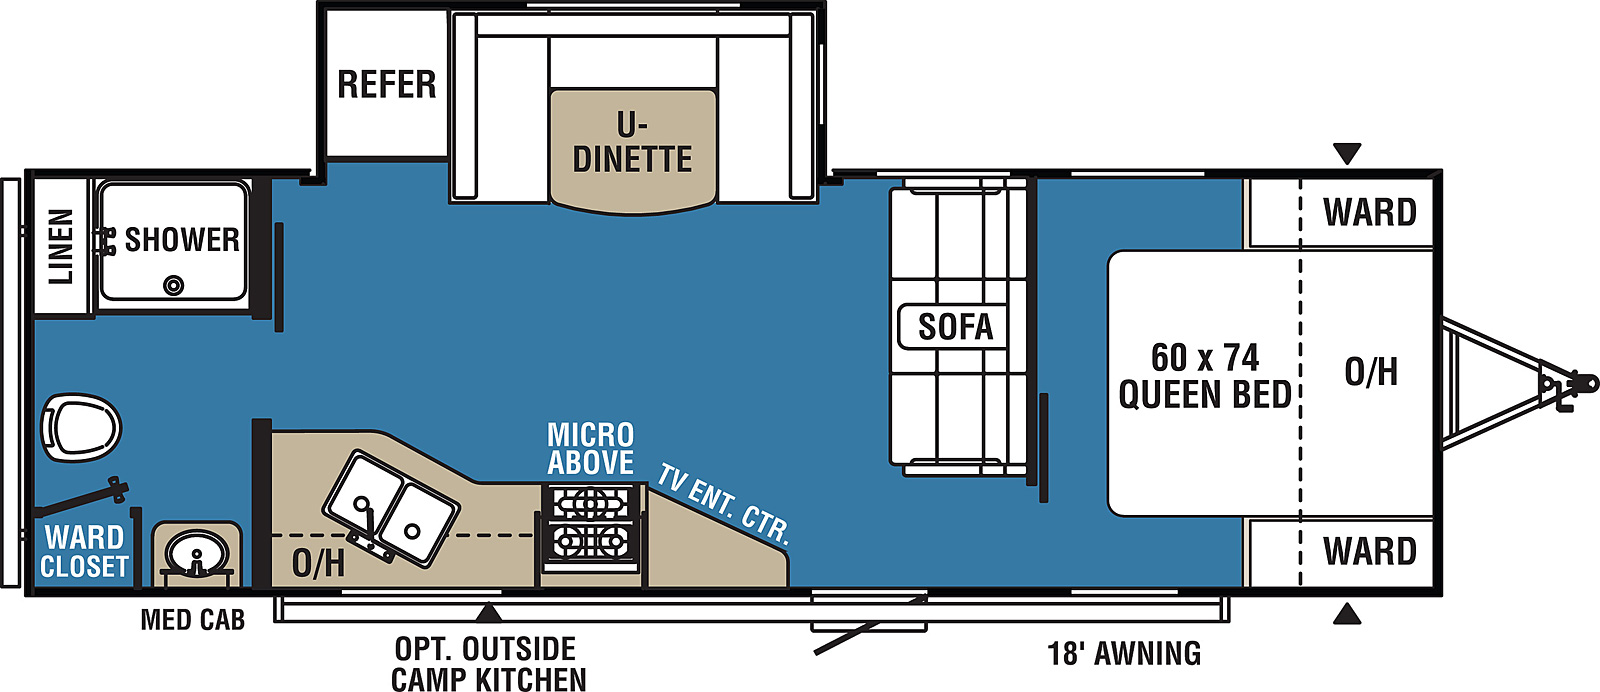 Clipper Ultra-Lite 24RBS floorplan. The 24RBS has one slide out and one entry door.